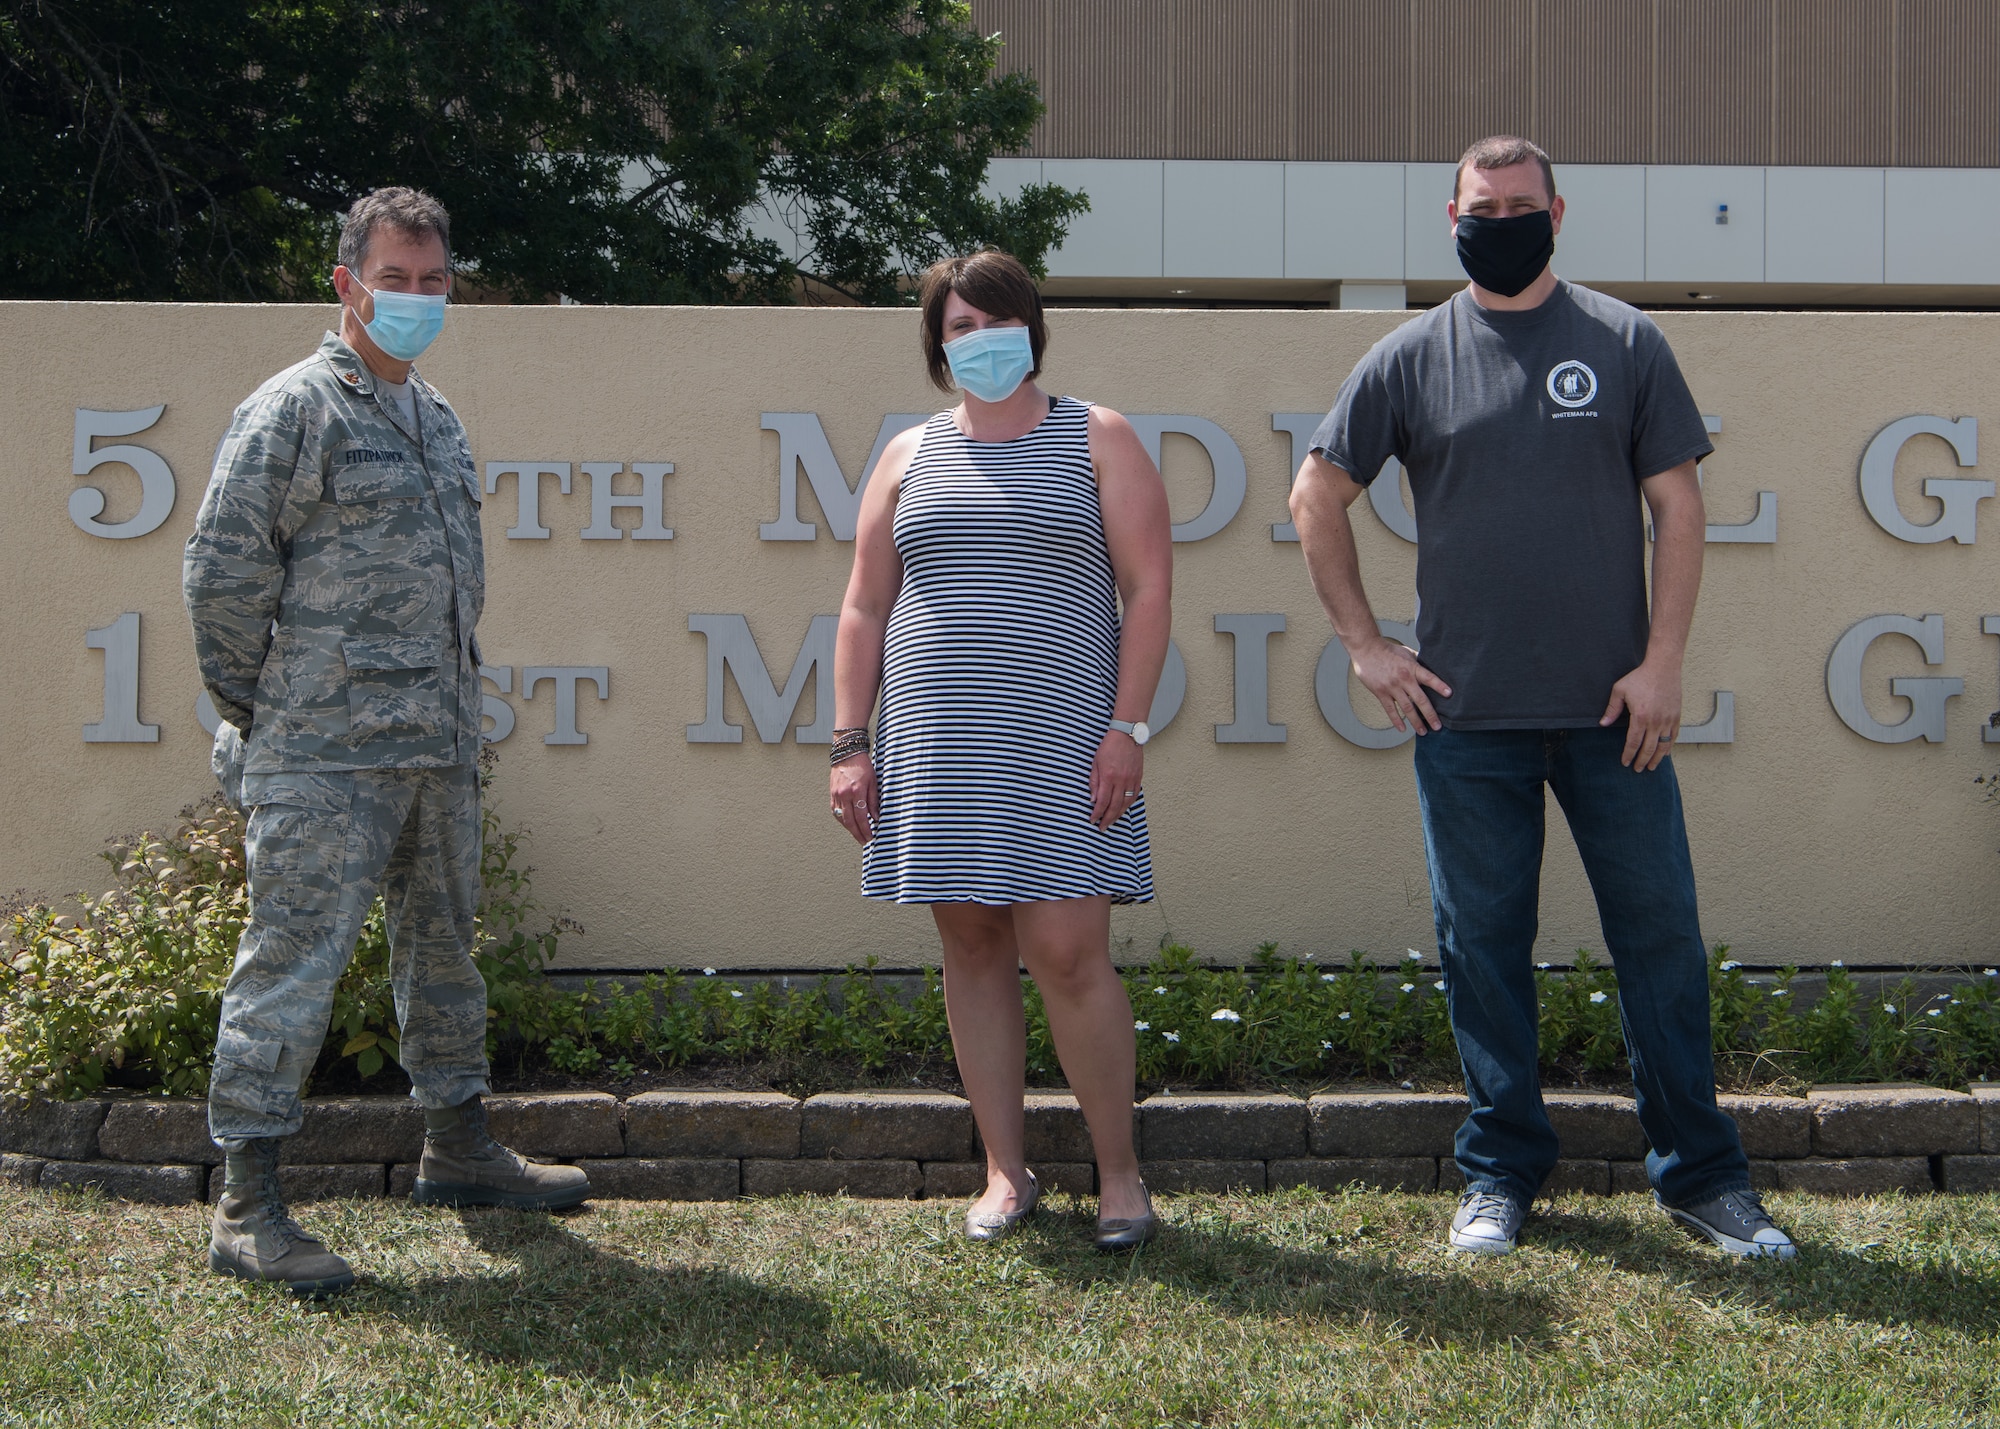 U.S. Air Force Maj. Sean FitzPatrick, a Family Advocacy Officer, left, Bethany Burkhart, a Domestic Abuse Victim Advocate, center, and Cory Watson, a family advocacy intervention specialist, right ,with the 509th Medical Group Family Advocacy Program stand for a photo on August 28, 2020 in front of the 509th MDG Clinic at Whiteman Air Force Base, Missouri. The overall military Family Advocacy Program has the primary goals of preventing abuse, encouraging early identification and prompt reporting, promoting victim safety and empowerment, and providing appropriate treatment for affected service members and their families. (U.S. Air Force photo by Airman 1st Class Parker J. McCauley)